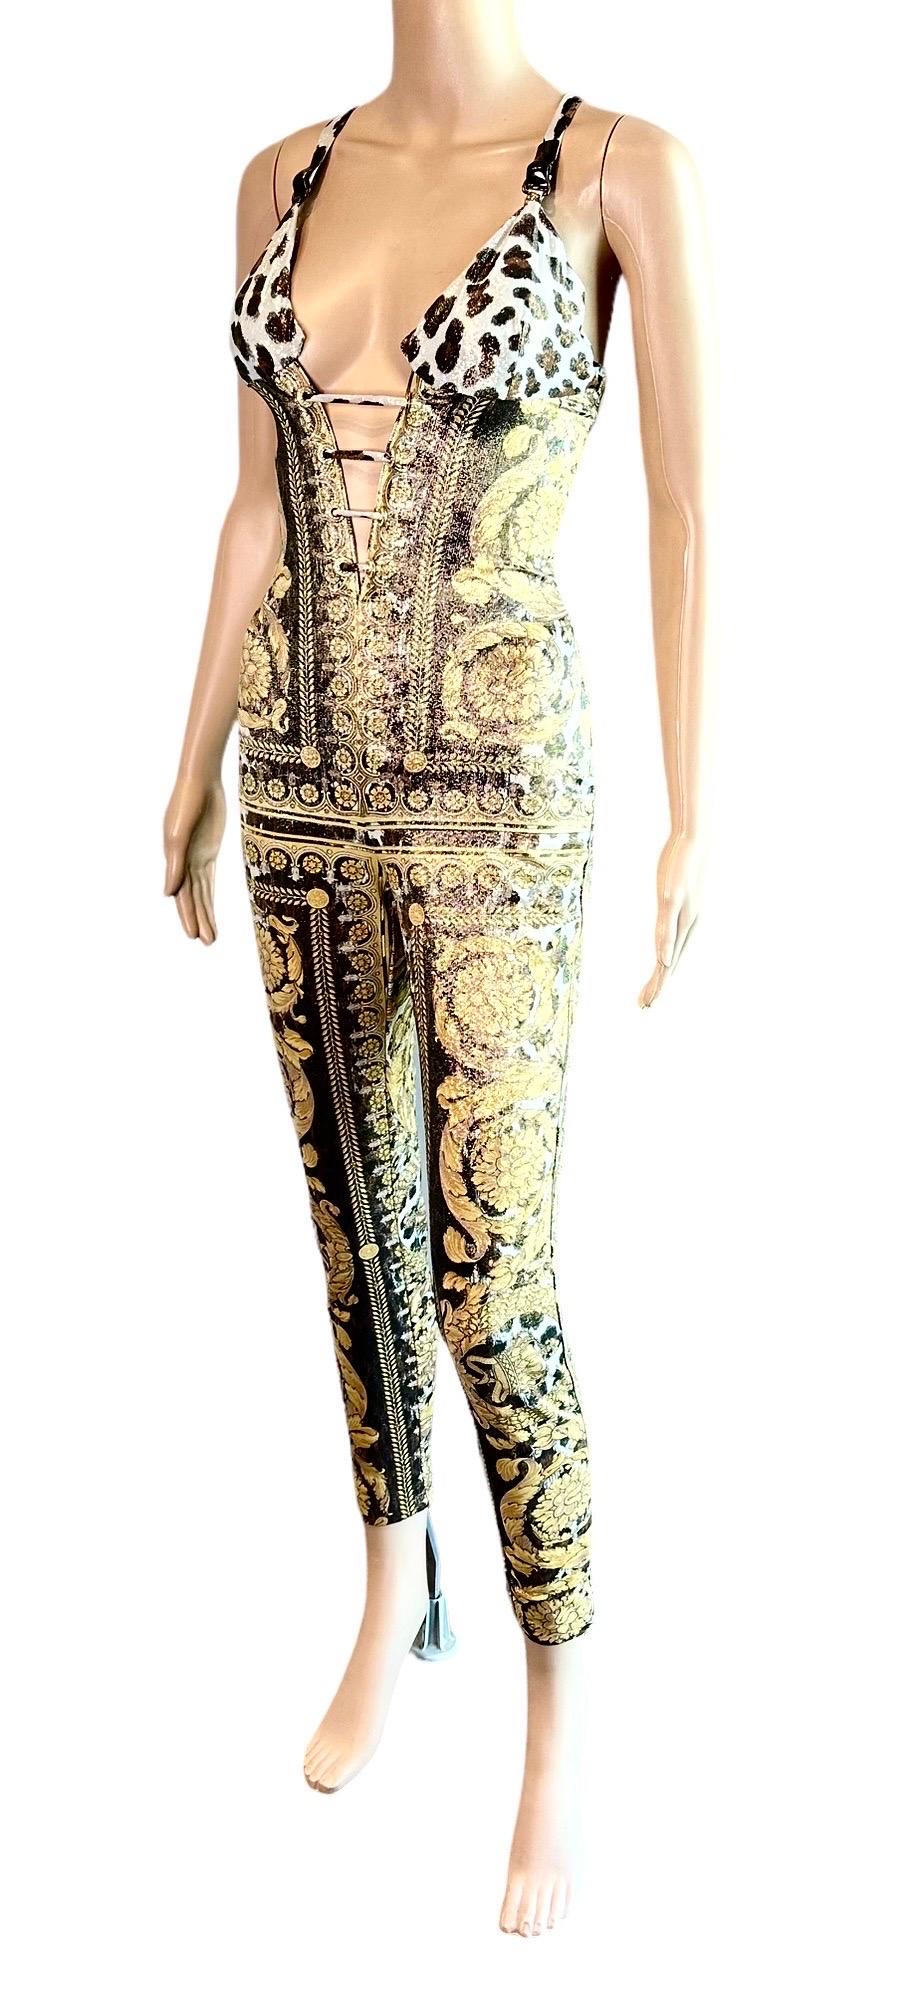 Gianni Versace S/S 1992 Runway Bustier Embellished Baroque Catsuit Jumpsuit In Good Condition For Sale In Naples, FL